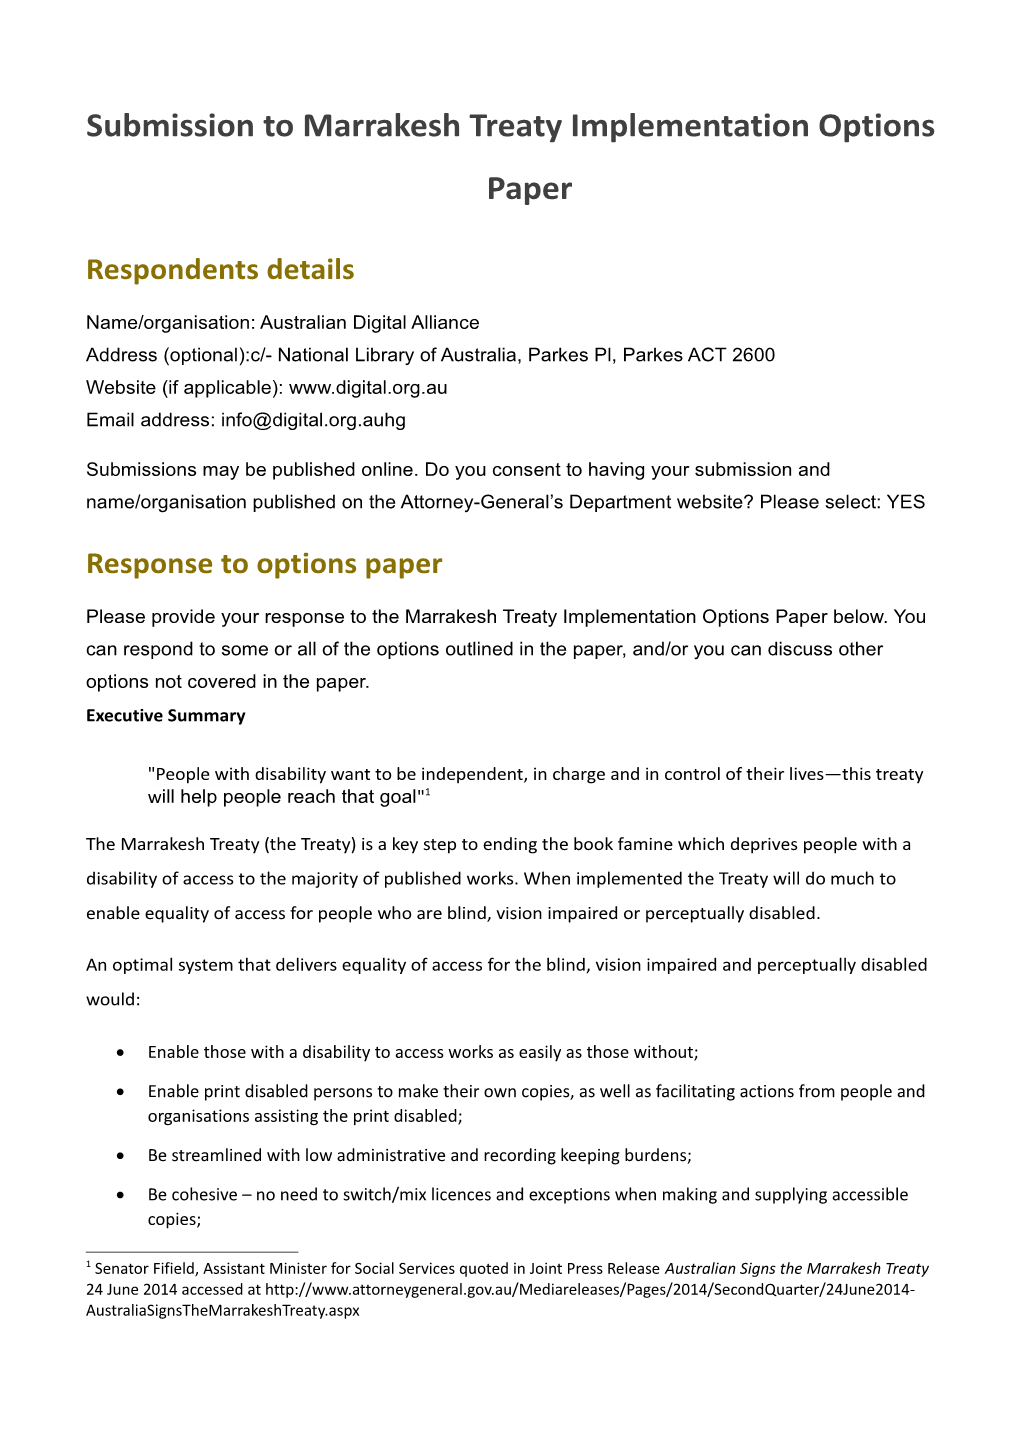 Australian Digital Alliance - Submission to Marrakesh Treaty Implementation Options Paper